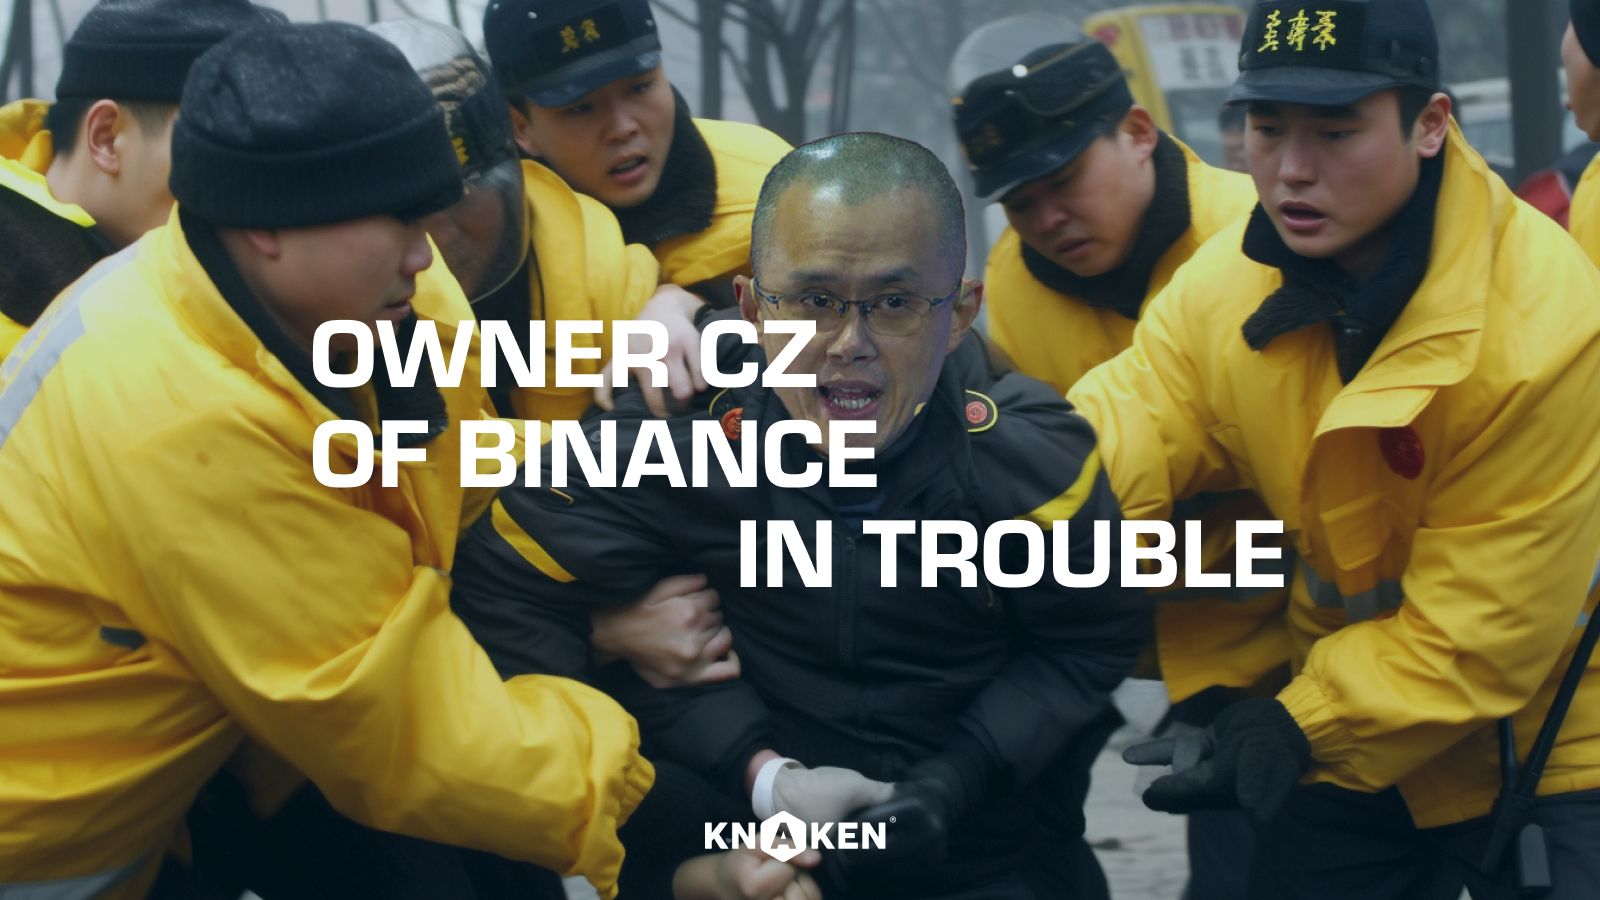 CZ, the CEO from Binance in trouble